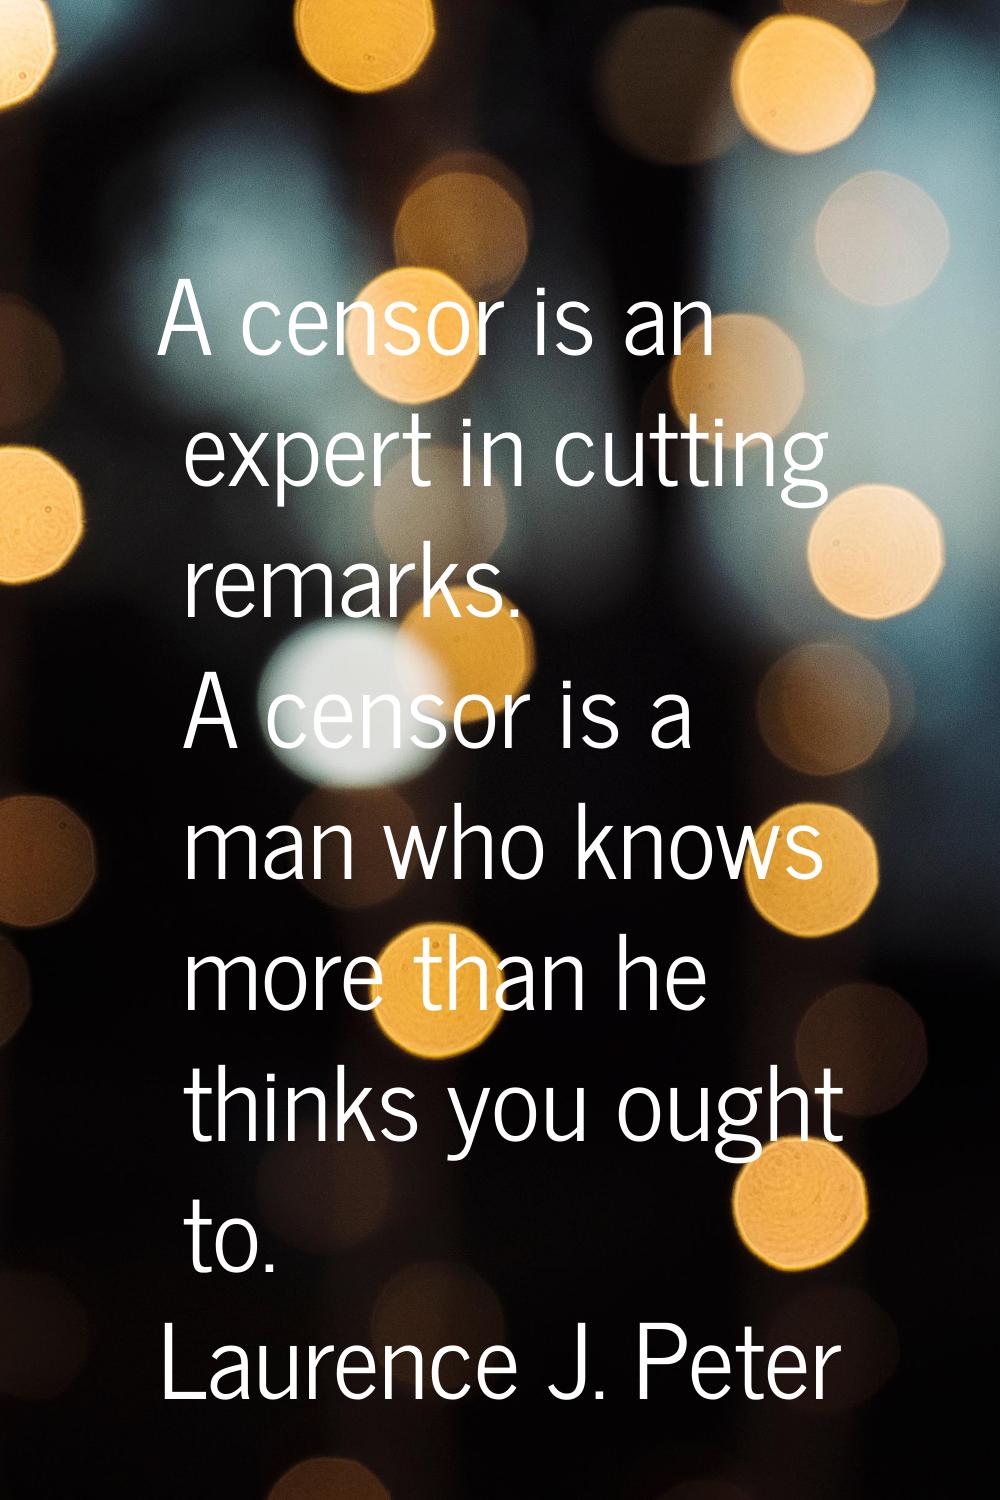 A censor is an expert in cutting remarks. A censor is a man who knows more than he thinks you ought